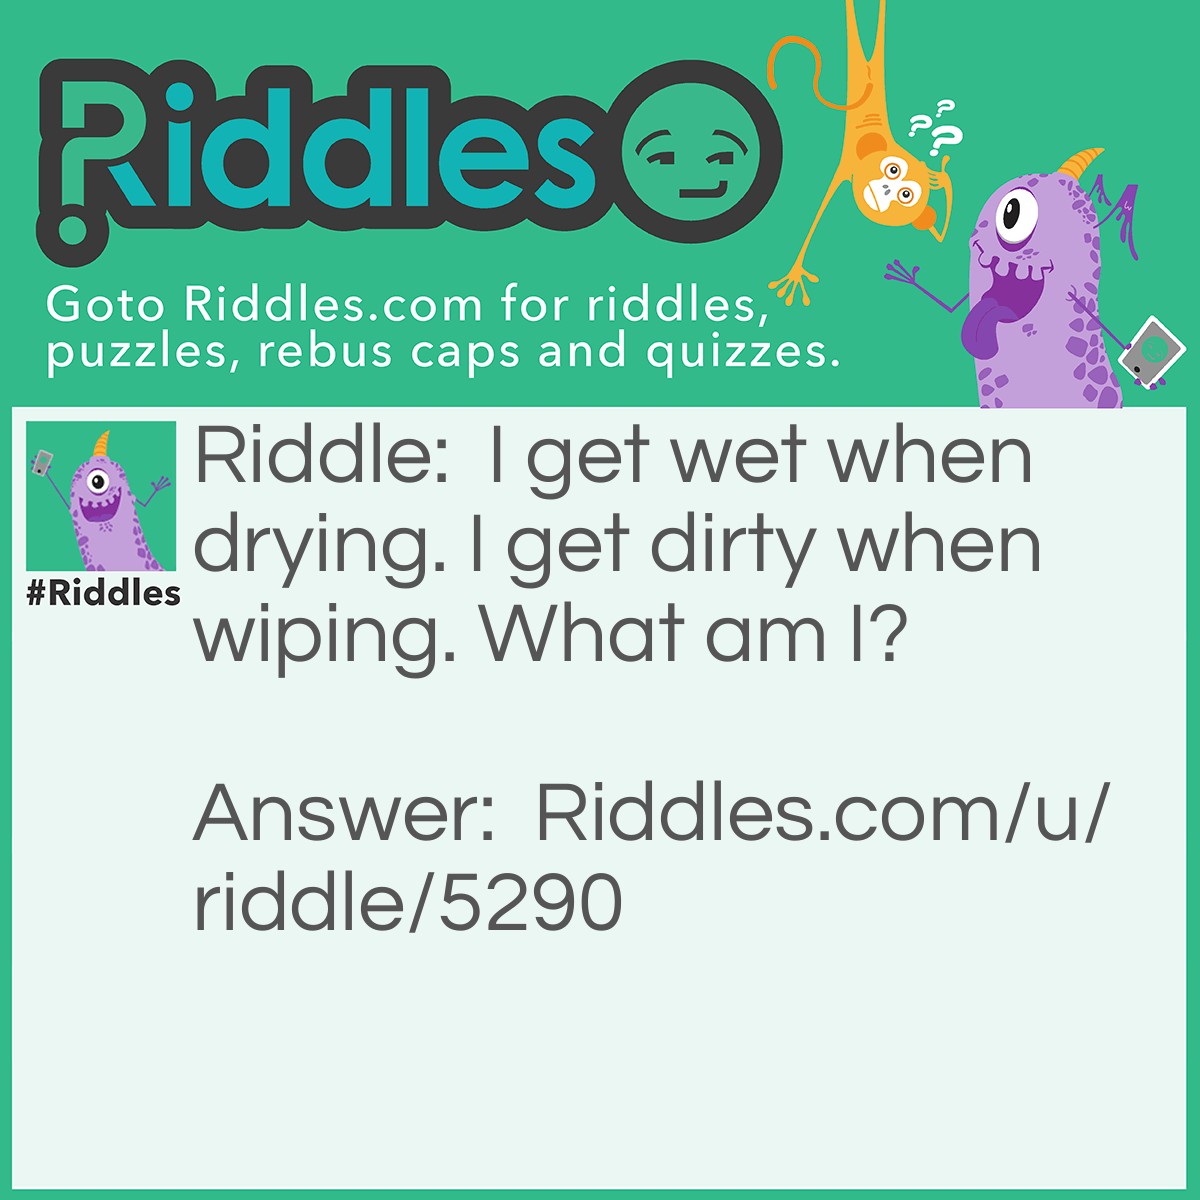 Riddle: I get wet when drying. I get dirty when wiping. What am I? Answer: A Towel.